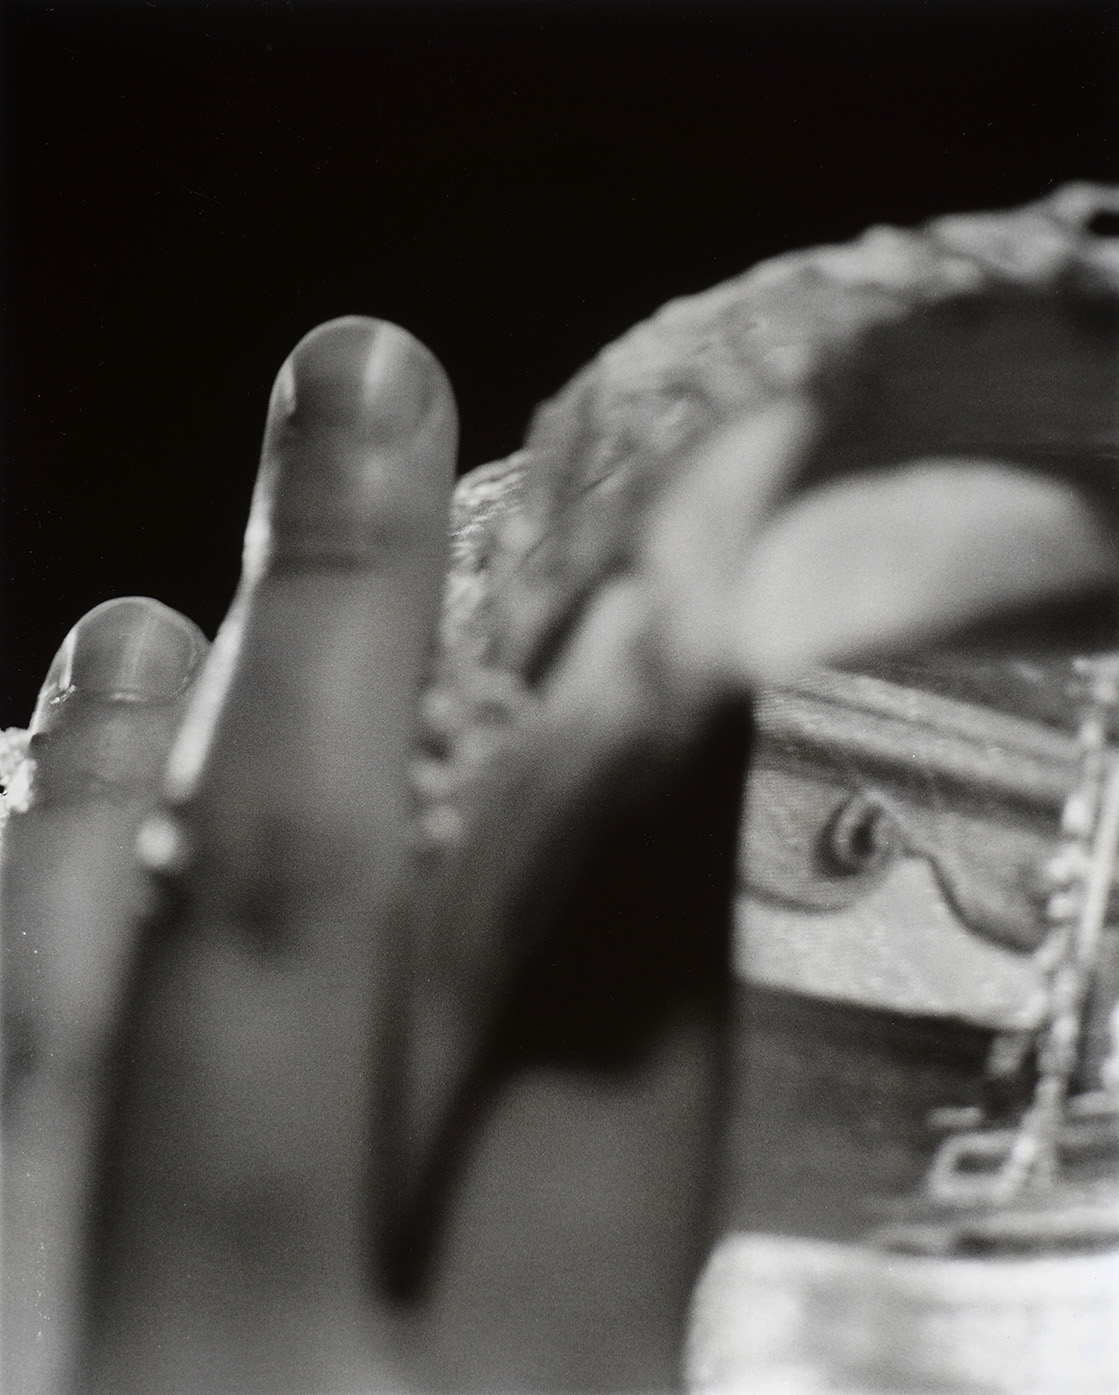 Untitled with Hand & Space 02 by Thom Puckey